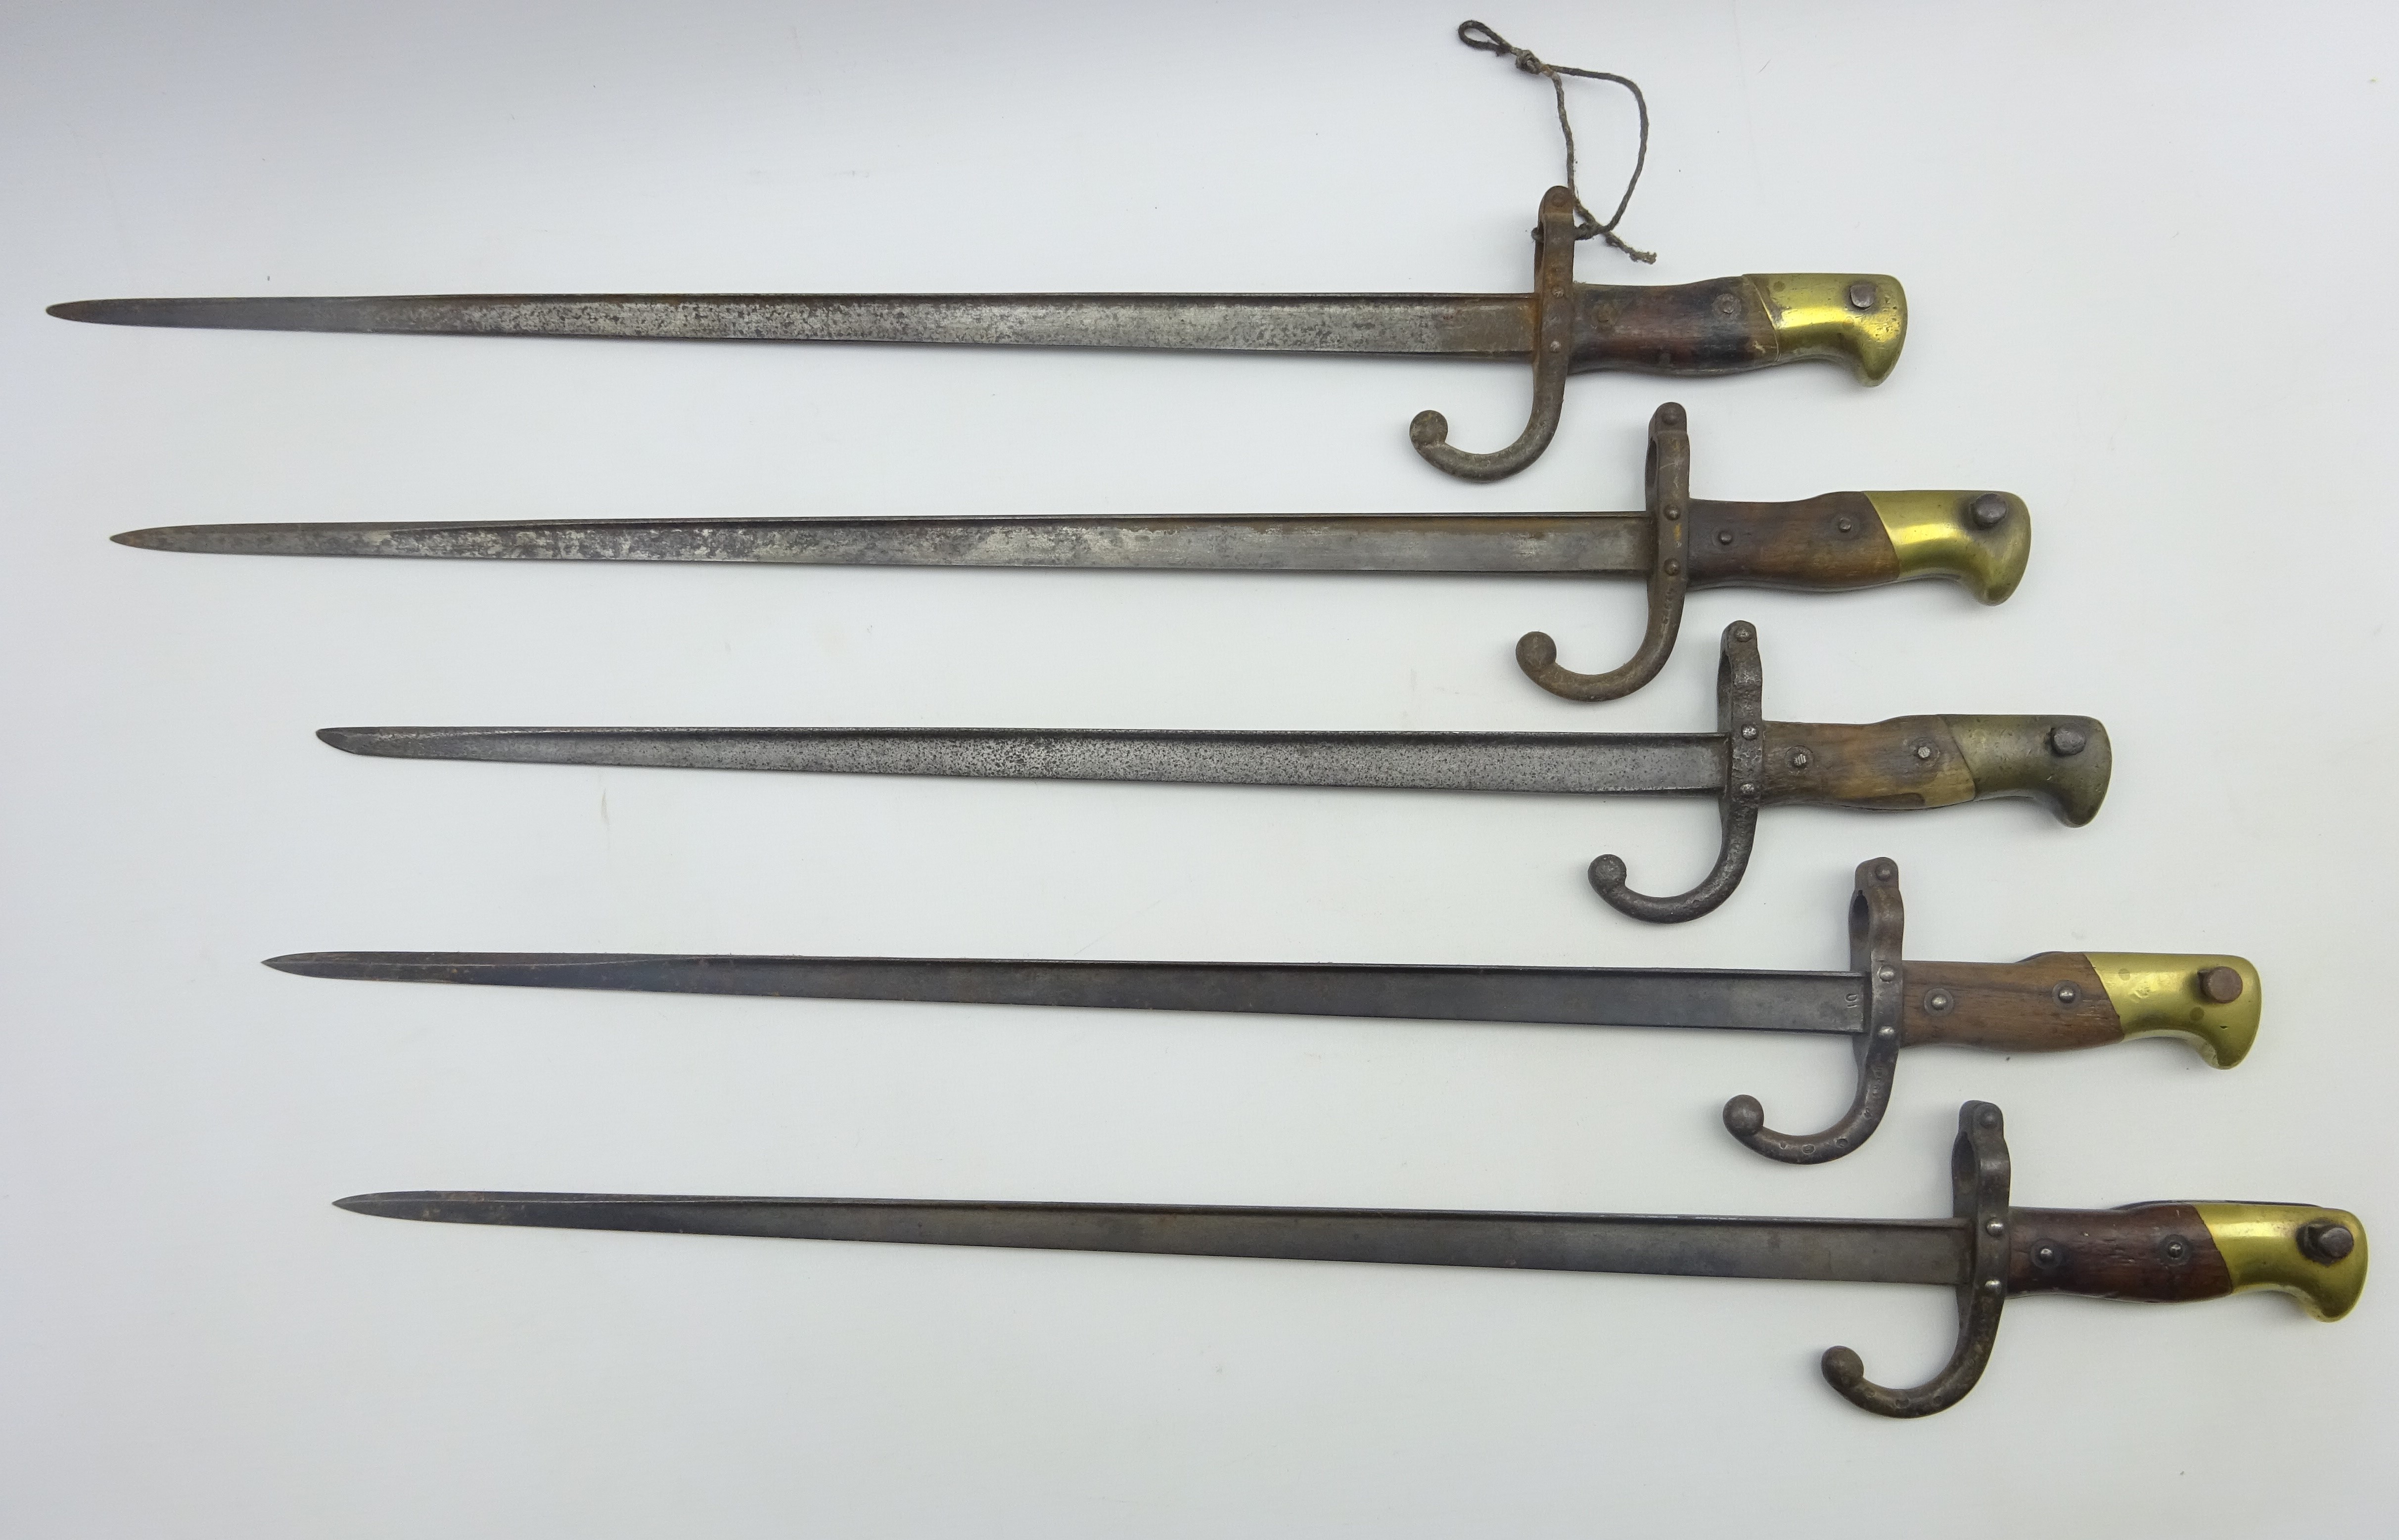 Five French Model 1874 Epee bayonets, various armouries including St. - Image 2 of 4